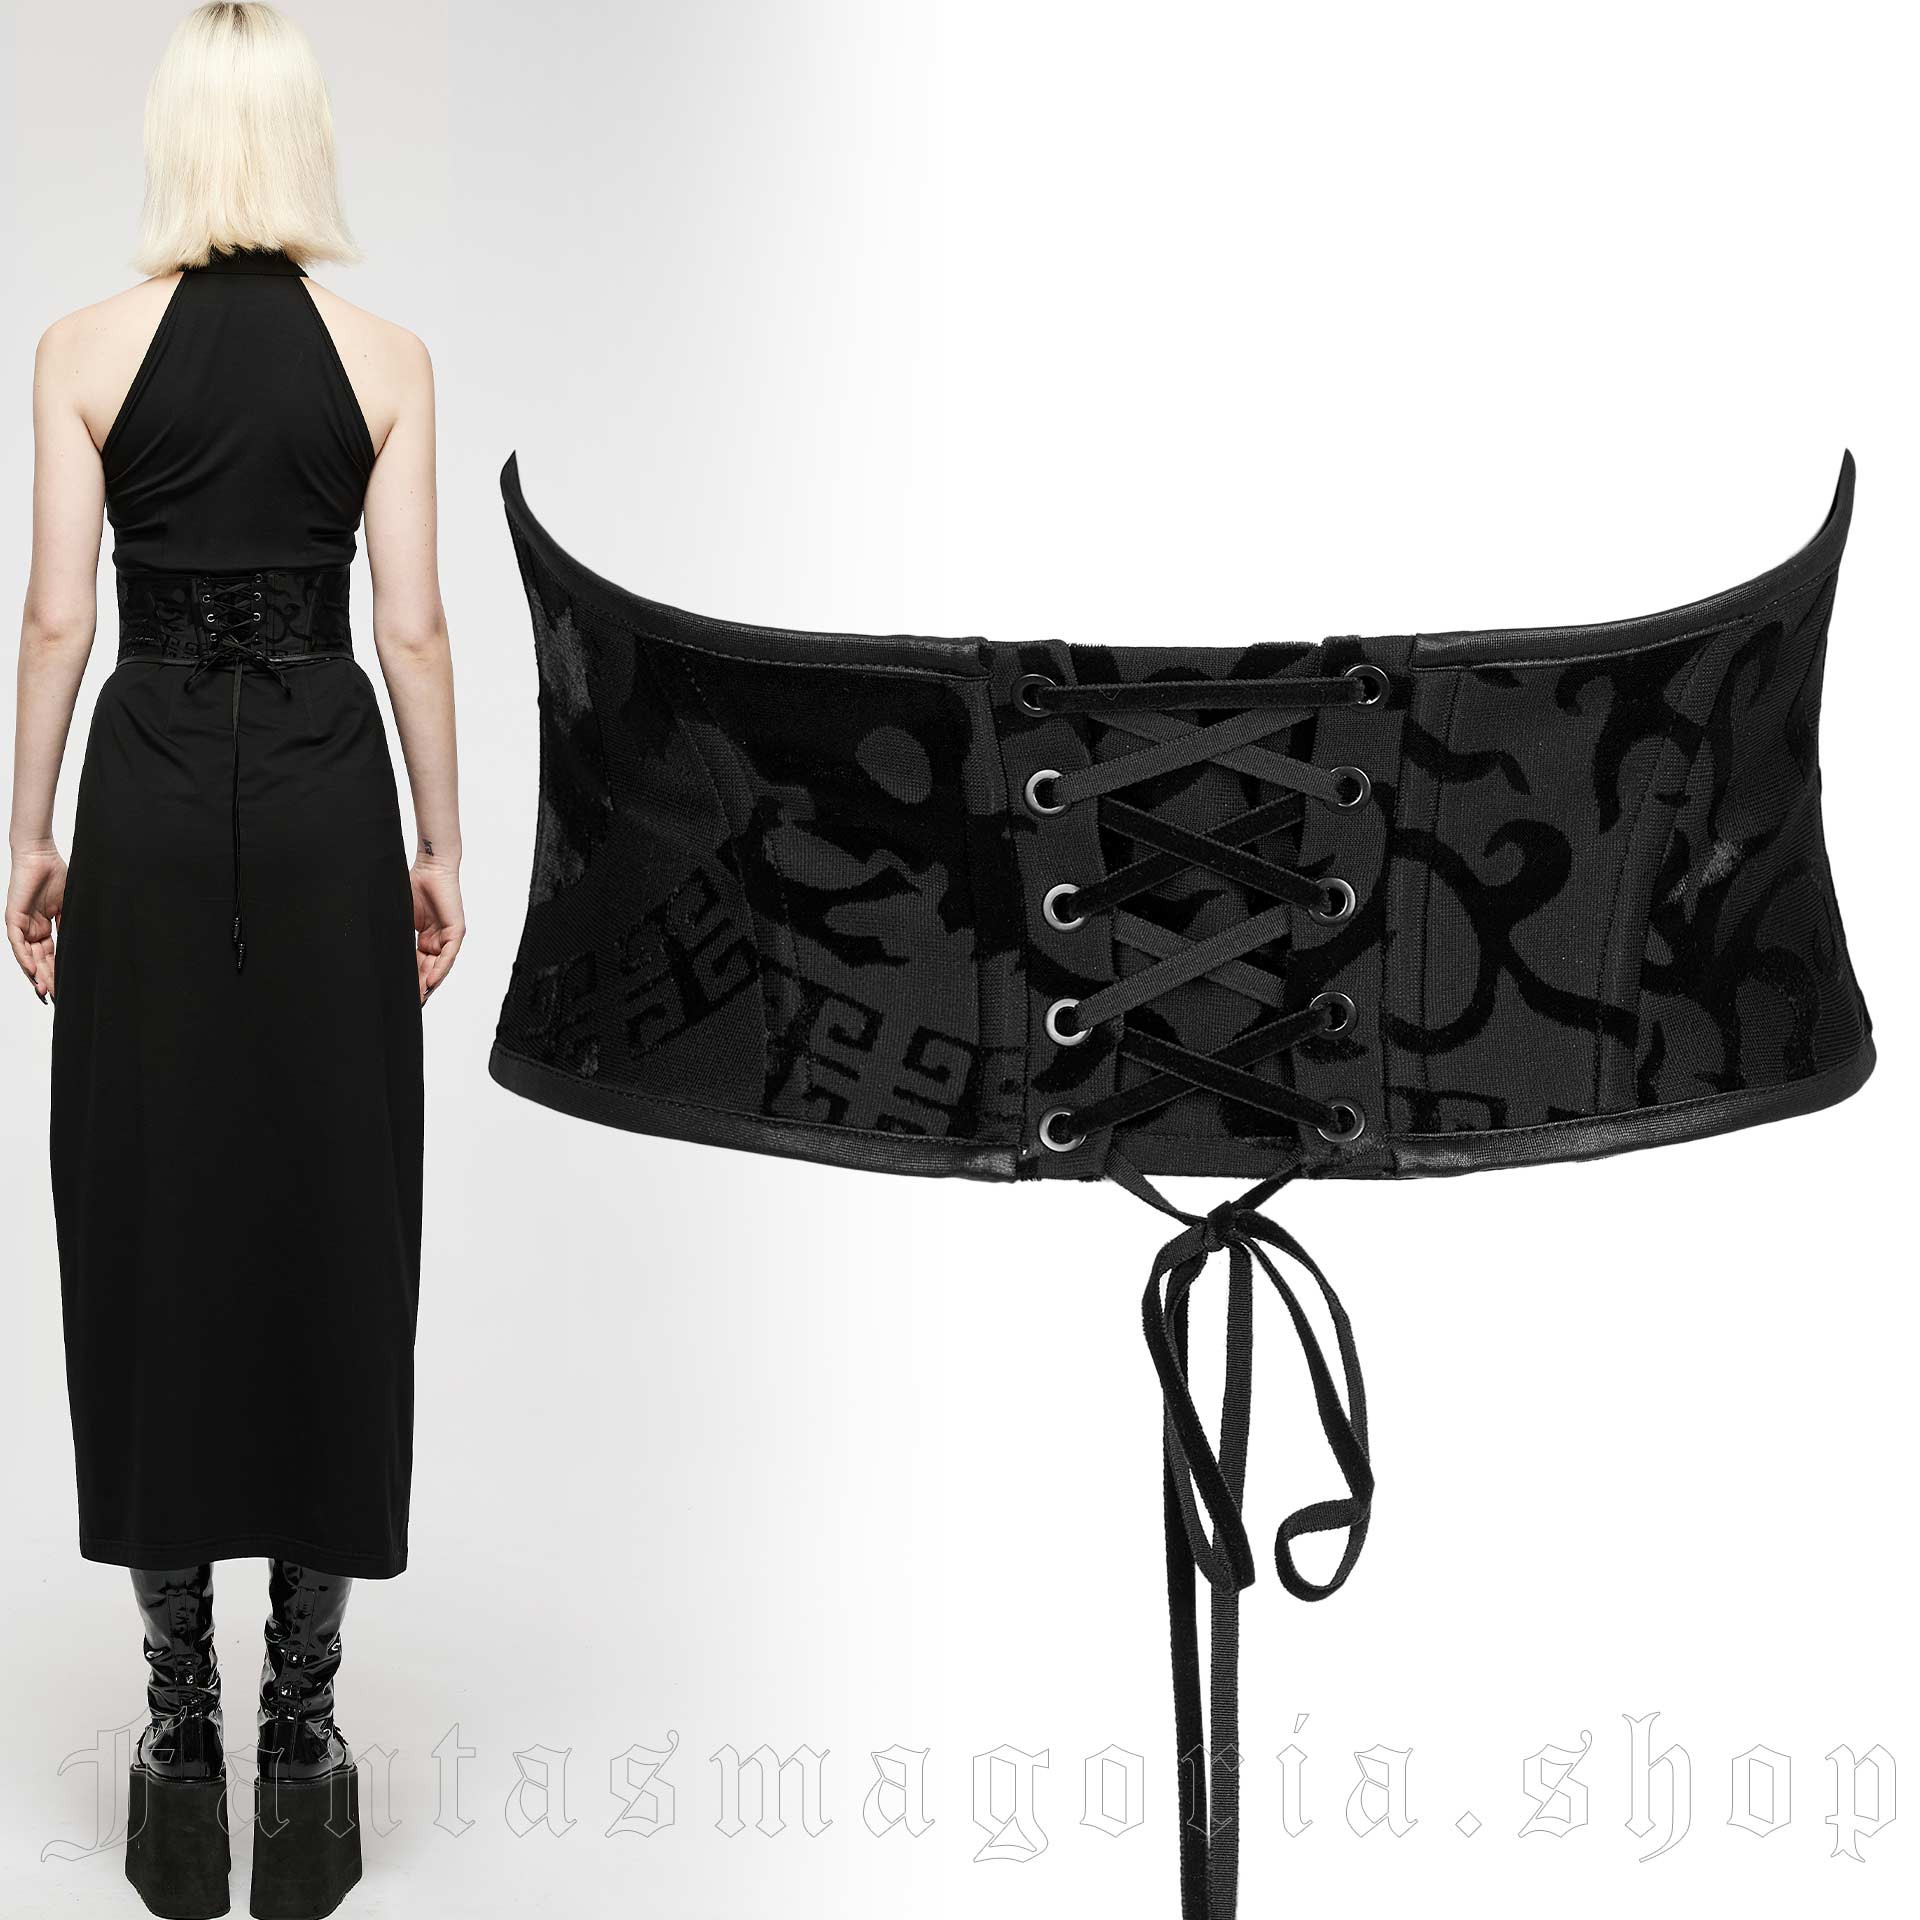 corset belt outfit  Corset belt outfit, Corset fashion outfits